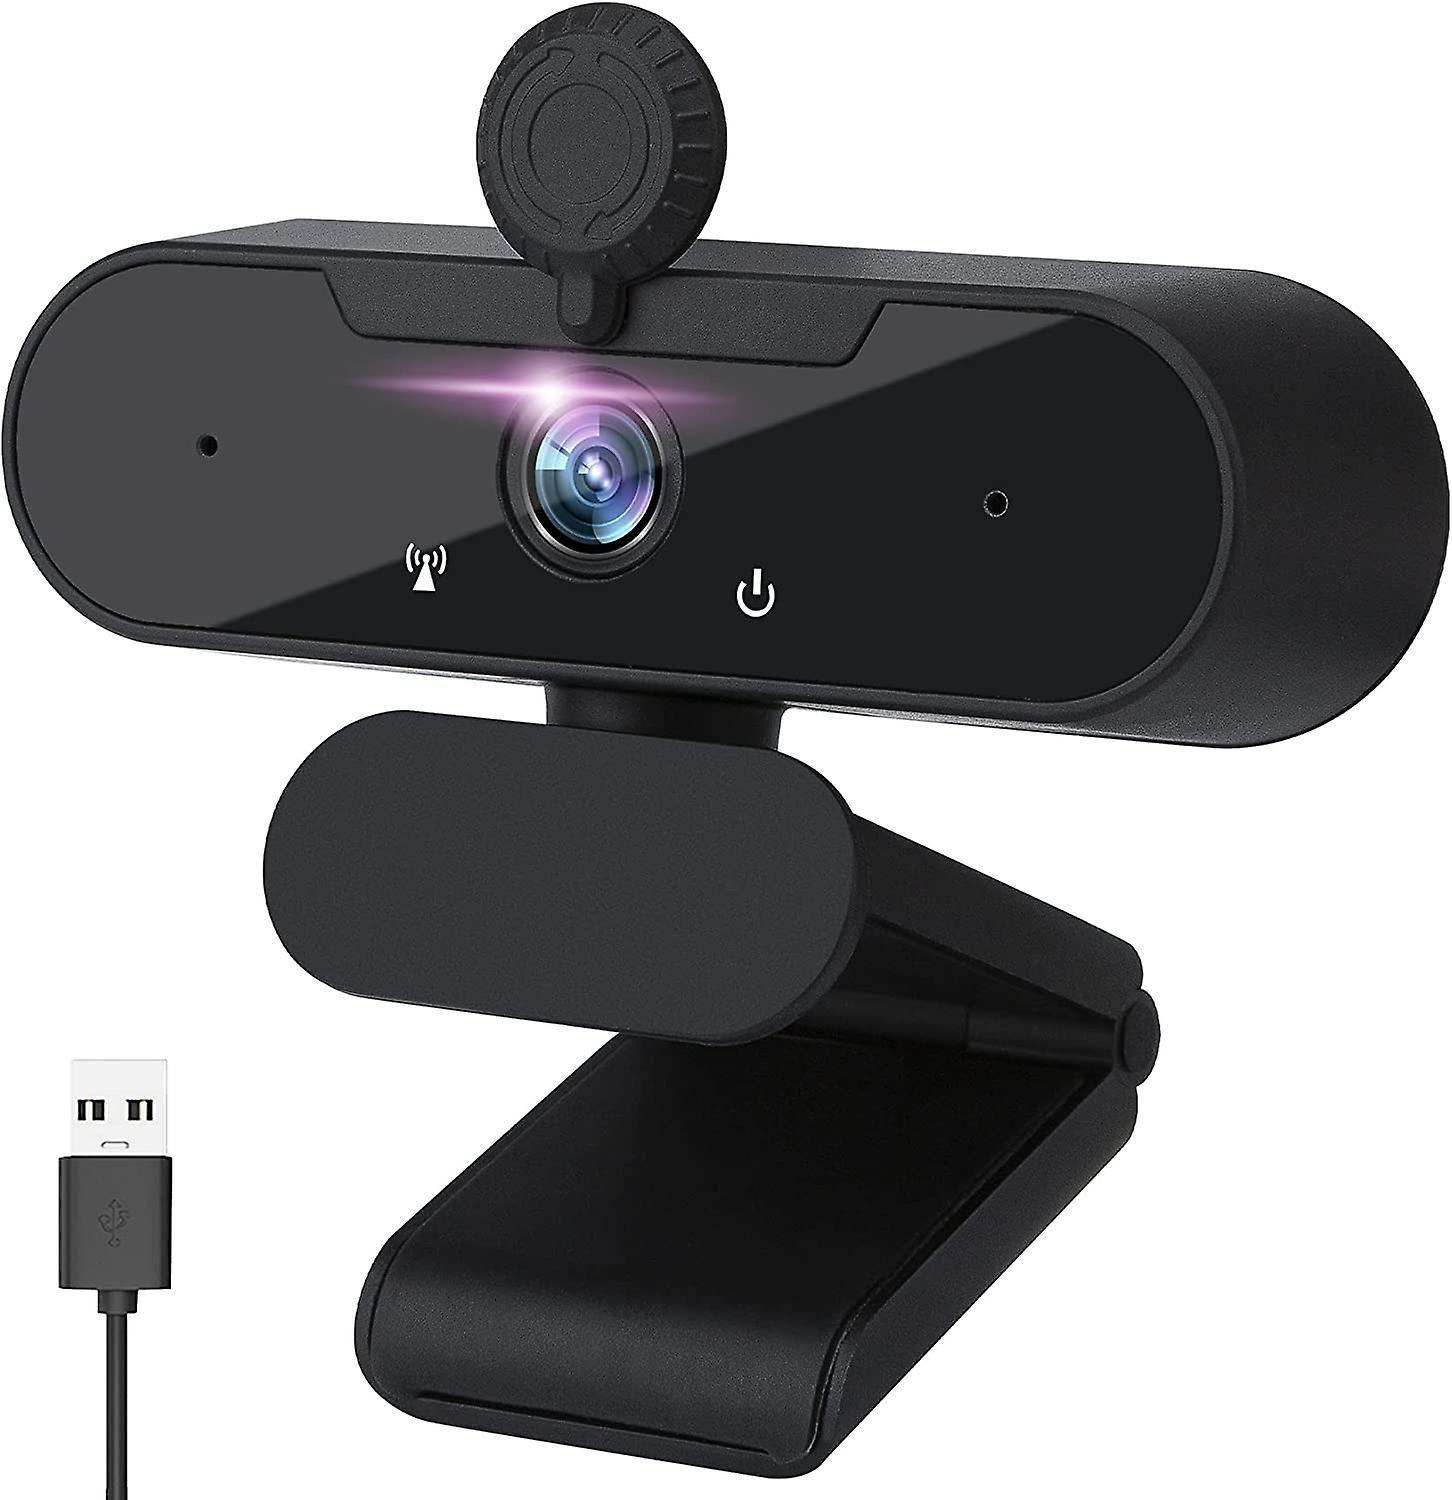 Webcam With Microphone, 1080p Full Hd With Webcam Cover, Laptop Pc Camera For Video Streaming, Conference, Games, Compatible With Windows / Linux / An